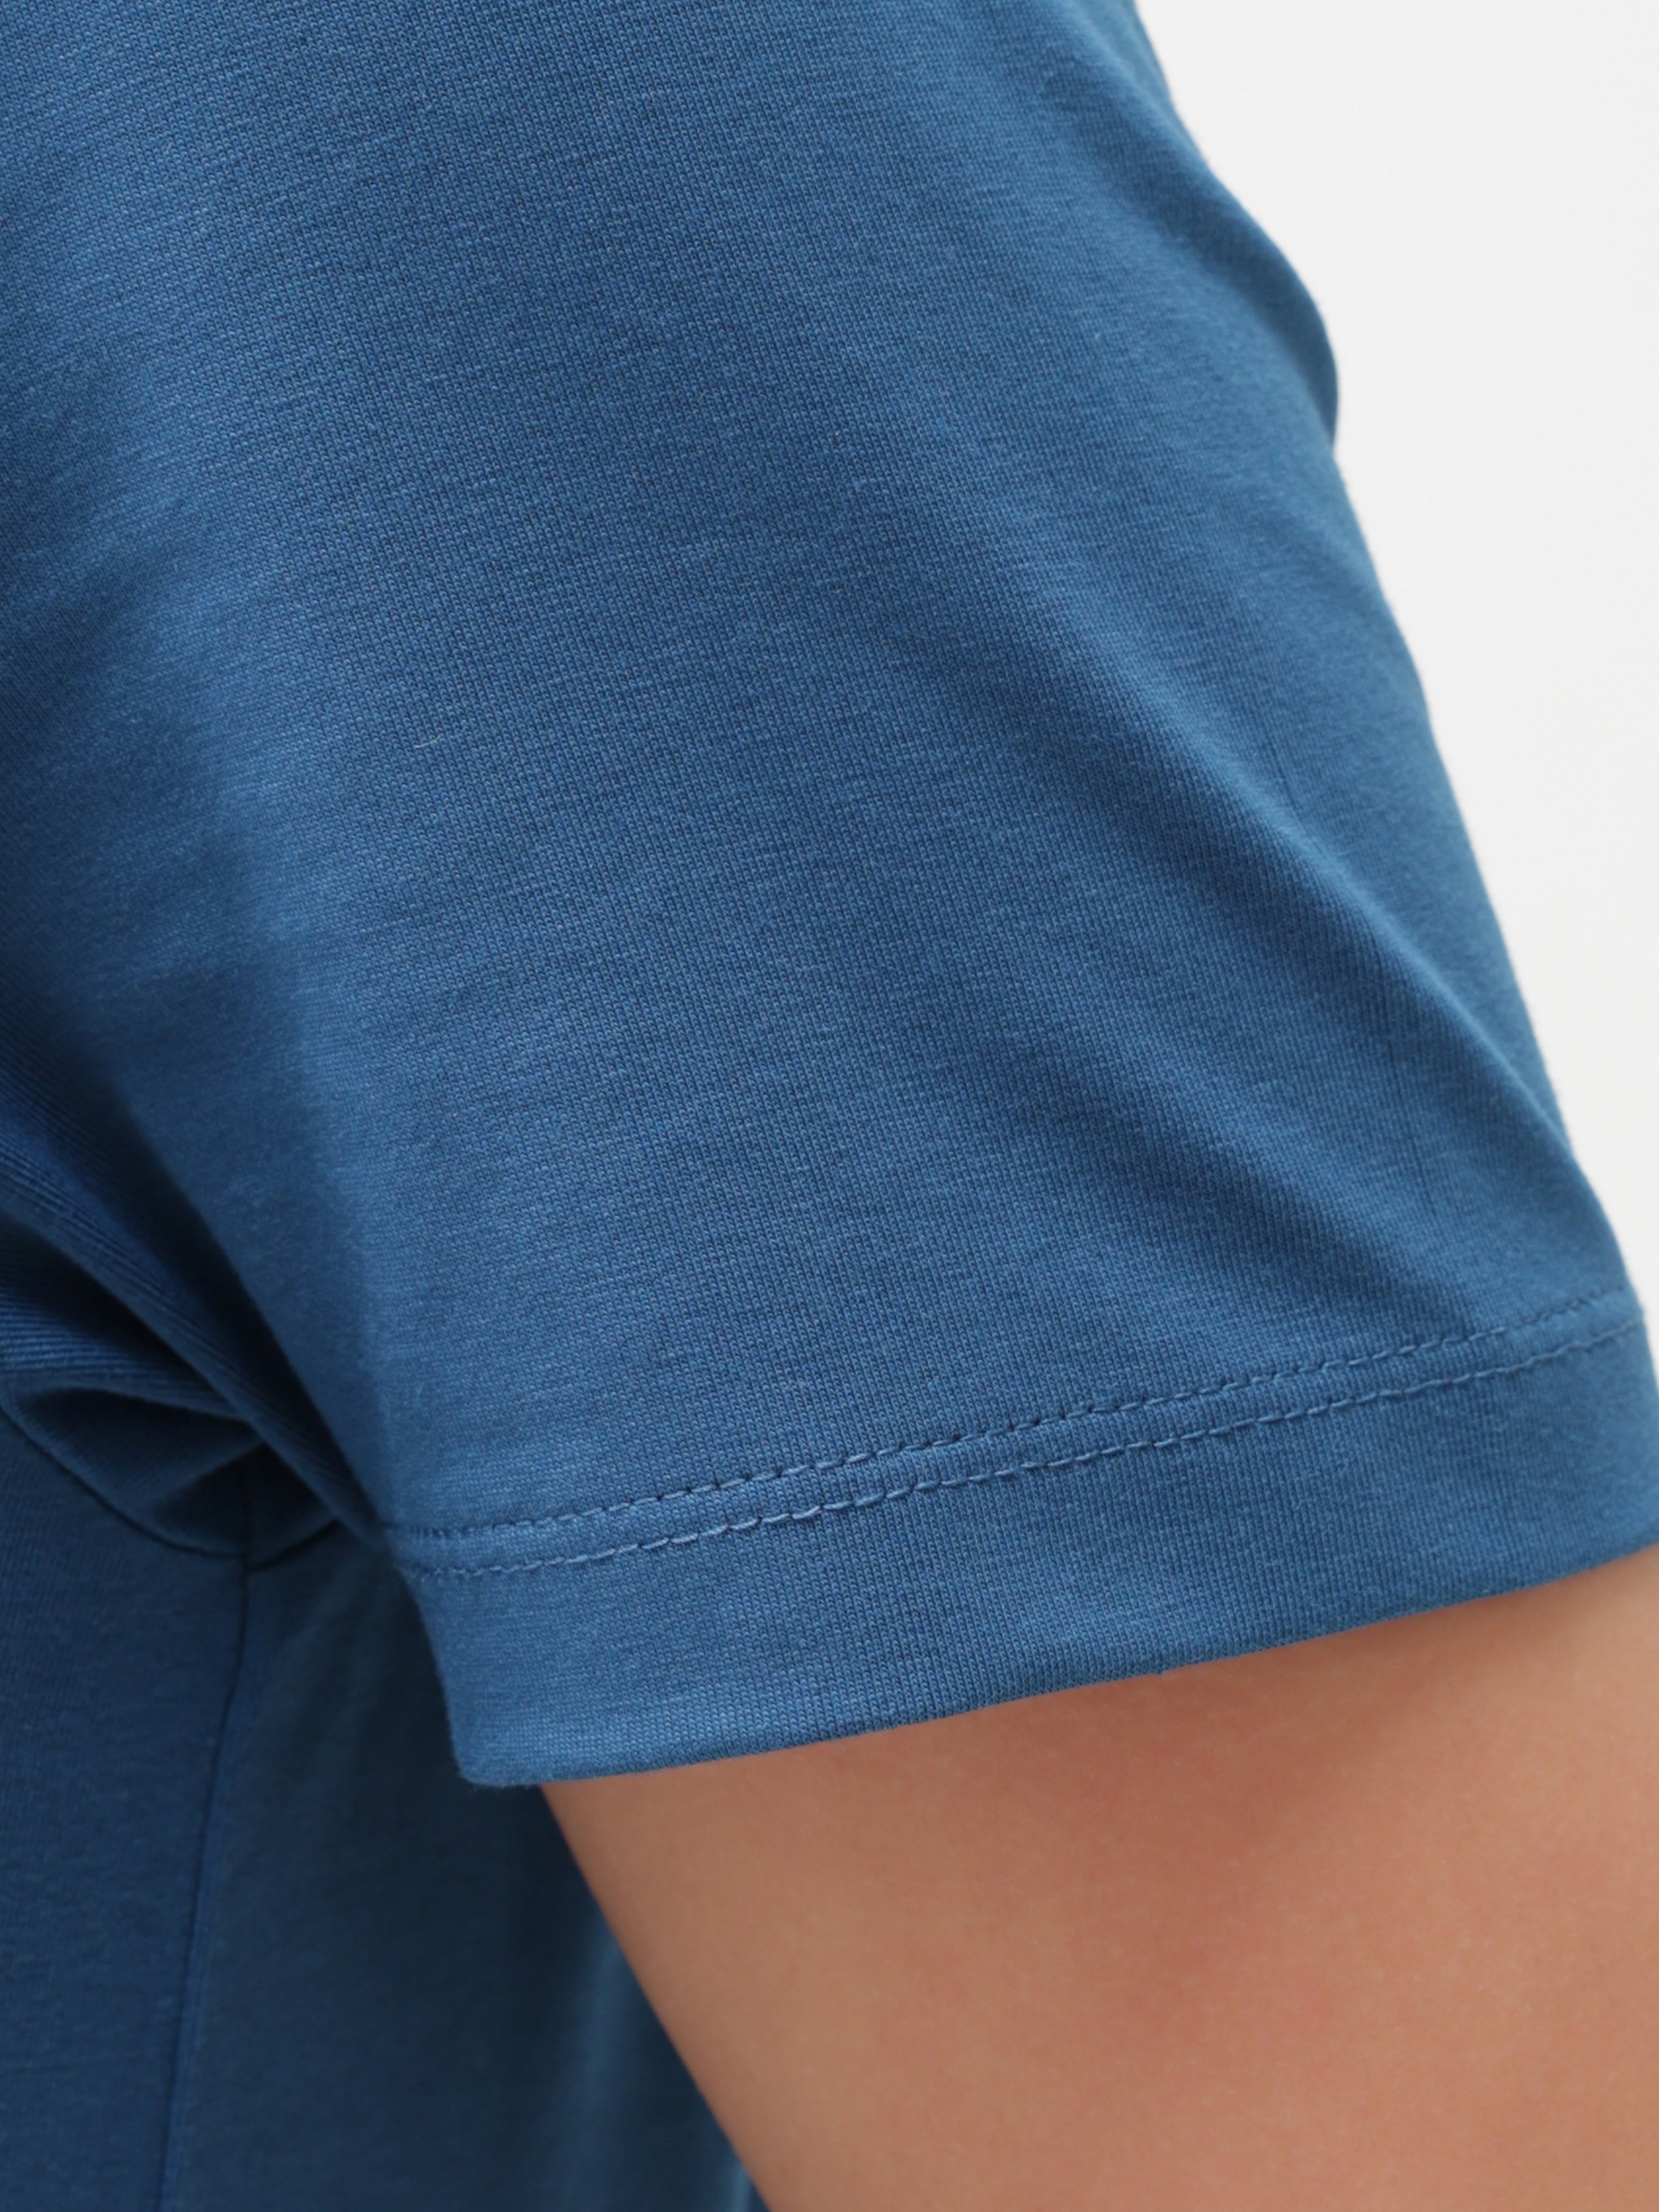 Close-up of sea blue Turms T-shirt sleeve, showcasing anti-stain, anti-odour, stretchable fabric with tailored fit and crew neckline.